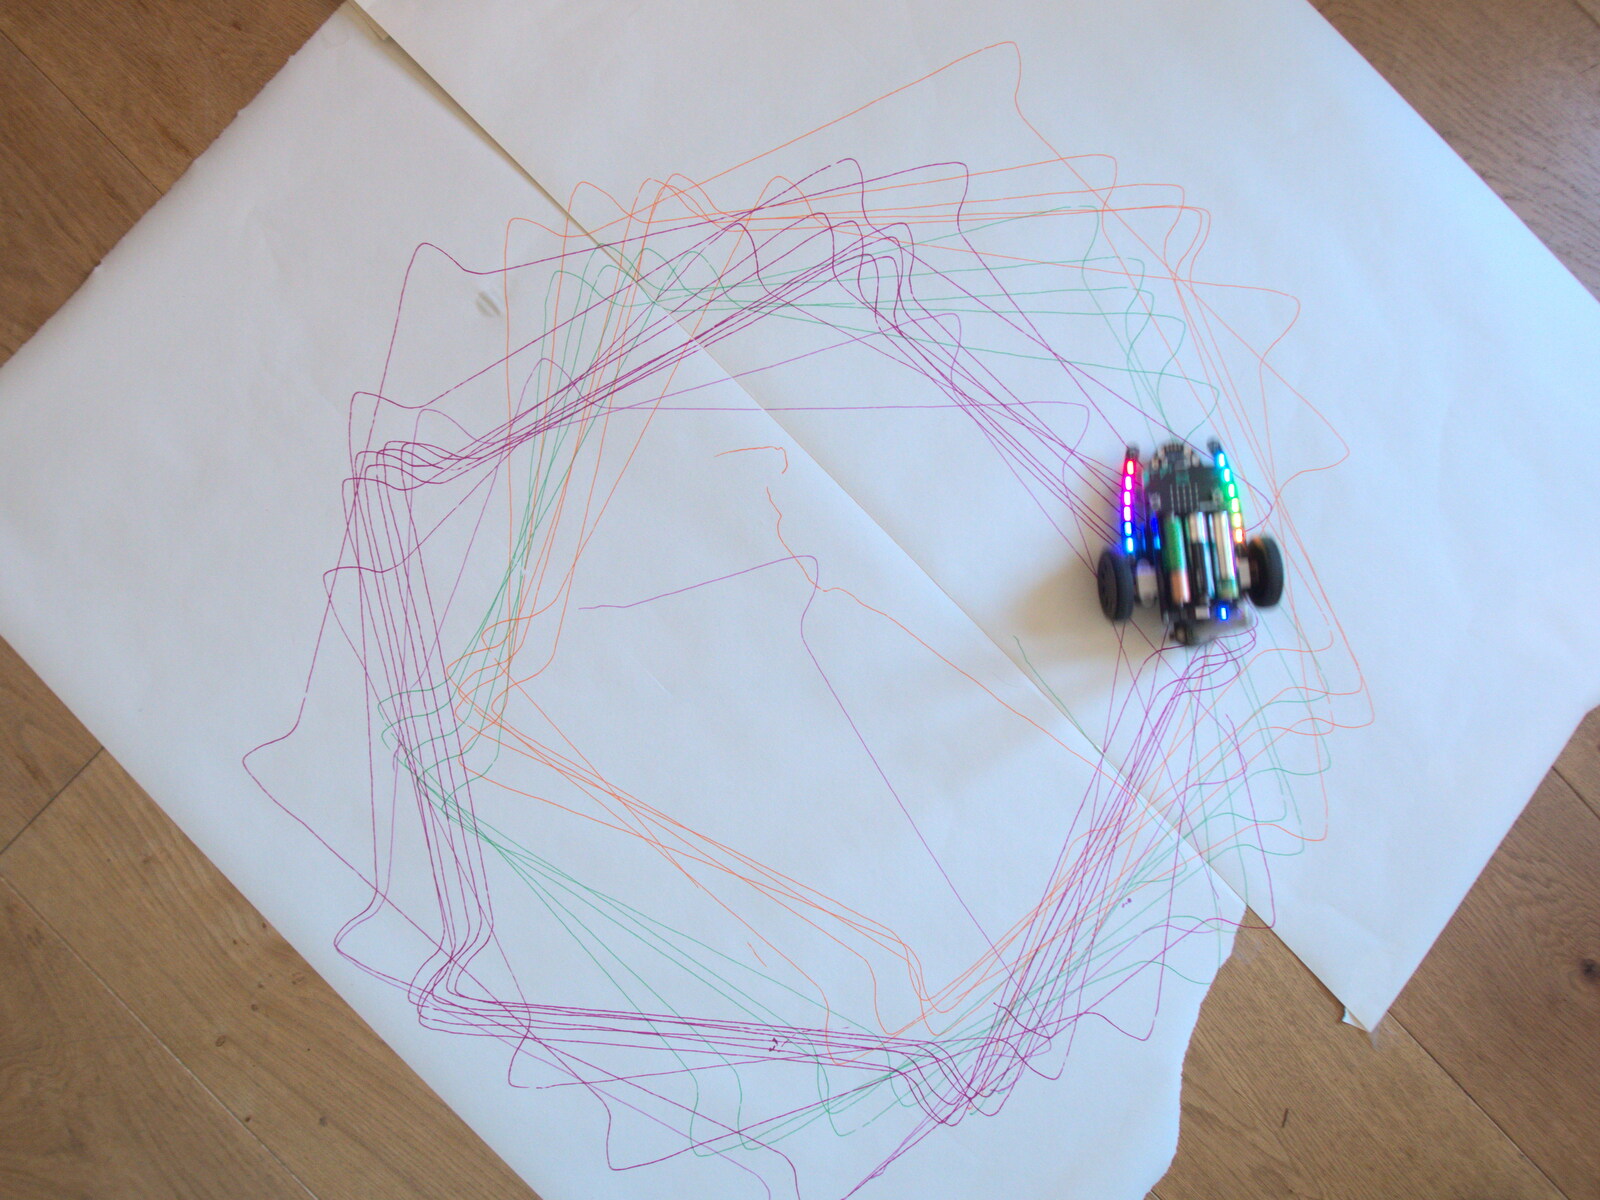 The MicroBot runs around like a Spirograph from The Old Brickworks and a New Road, Hoxne and Eye, Suffolk - 26th May 2020